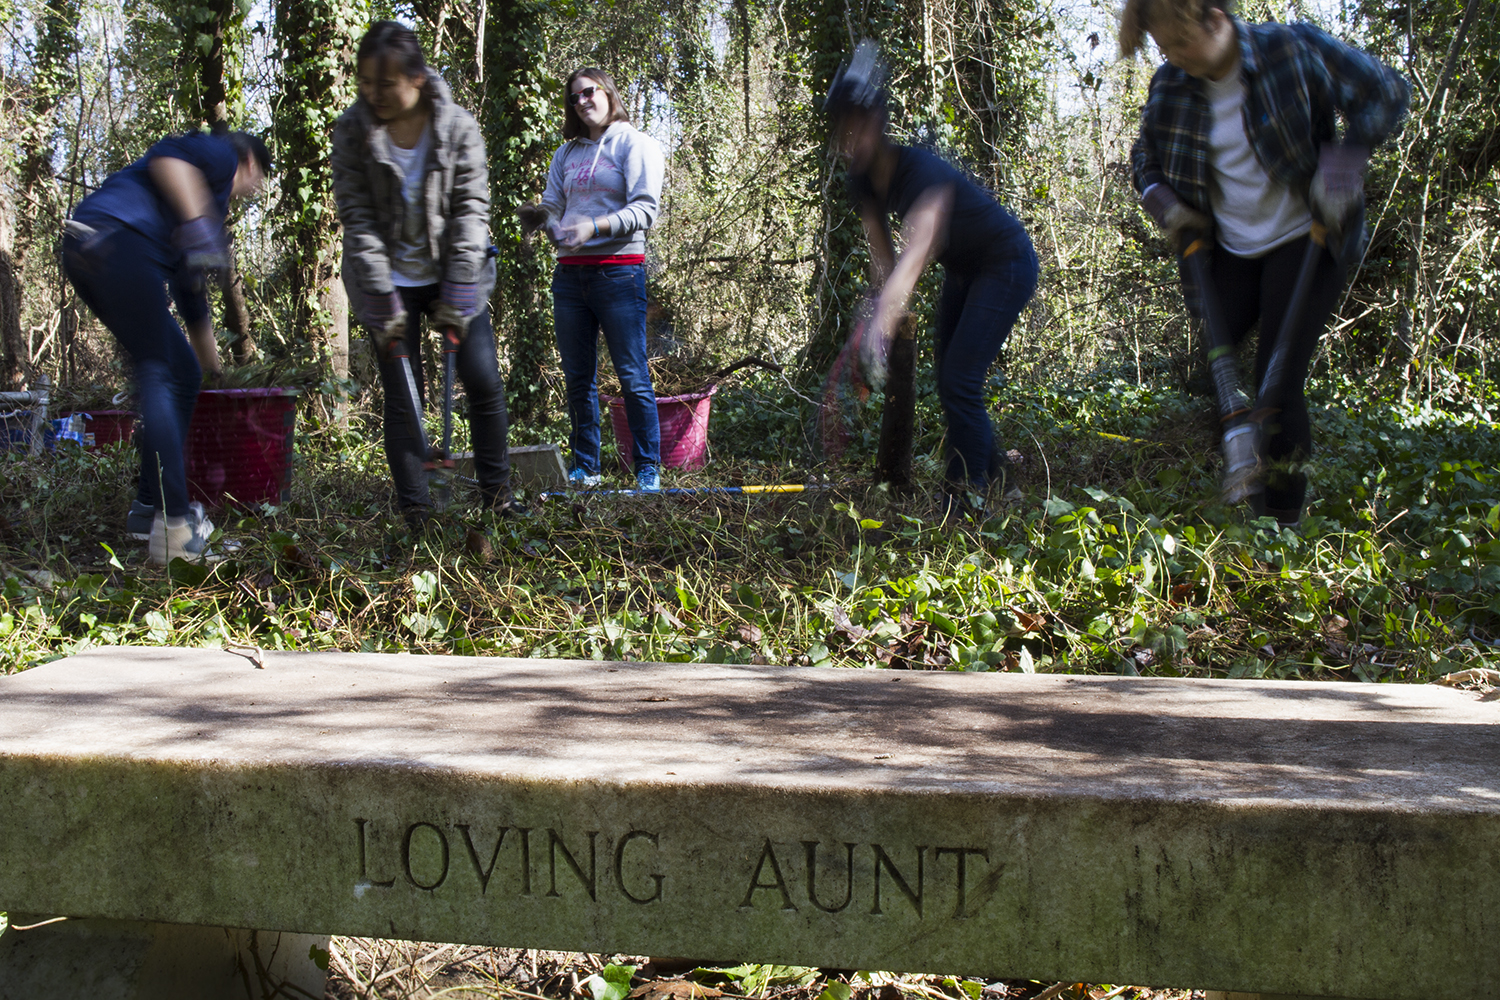  University of Richmond students, members of Alpha Phi Omega, clear undergrowth from graves during an East End Cemetery work day, January 2015.&nbsp;©brianpalmer.photos 2015       